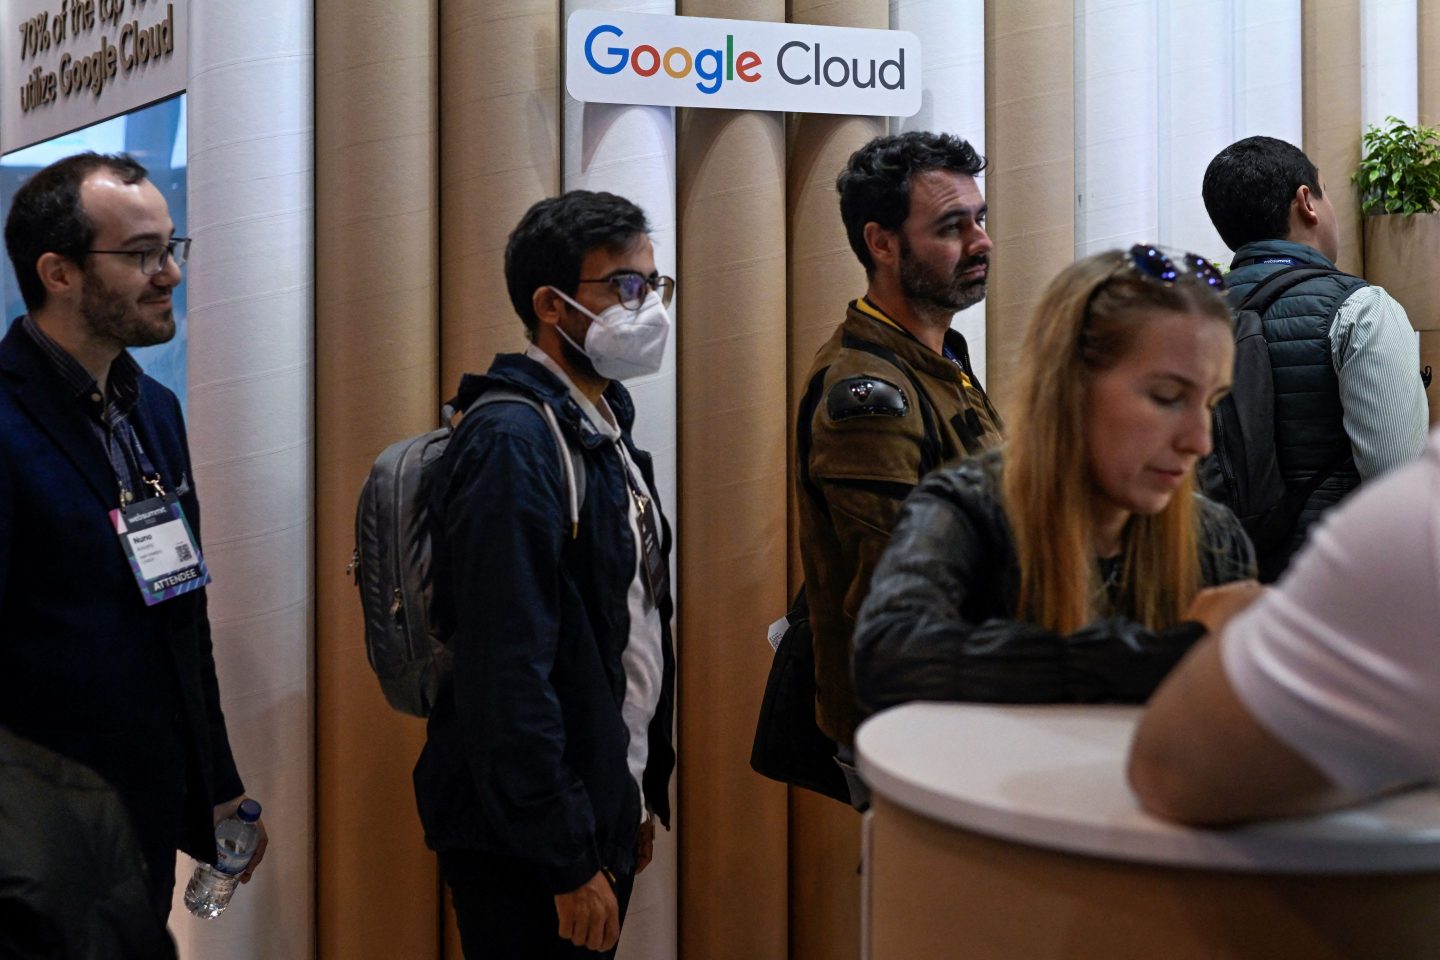 A group of people wait in a line underneath a Google Cloud sign in Lisbon, Portugal.